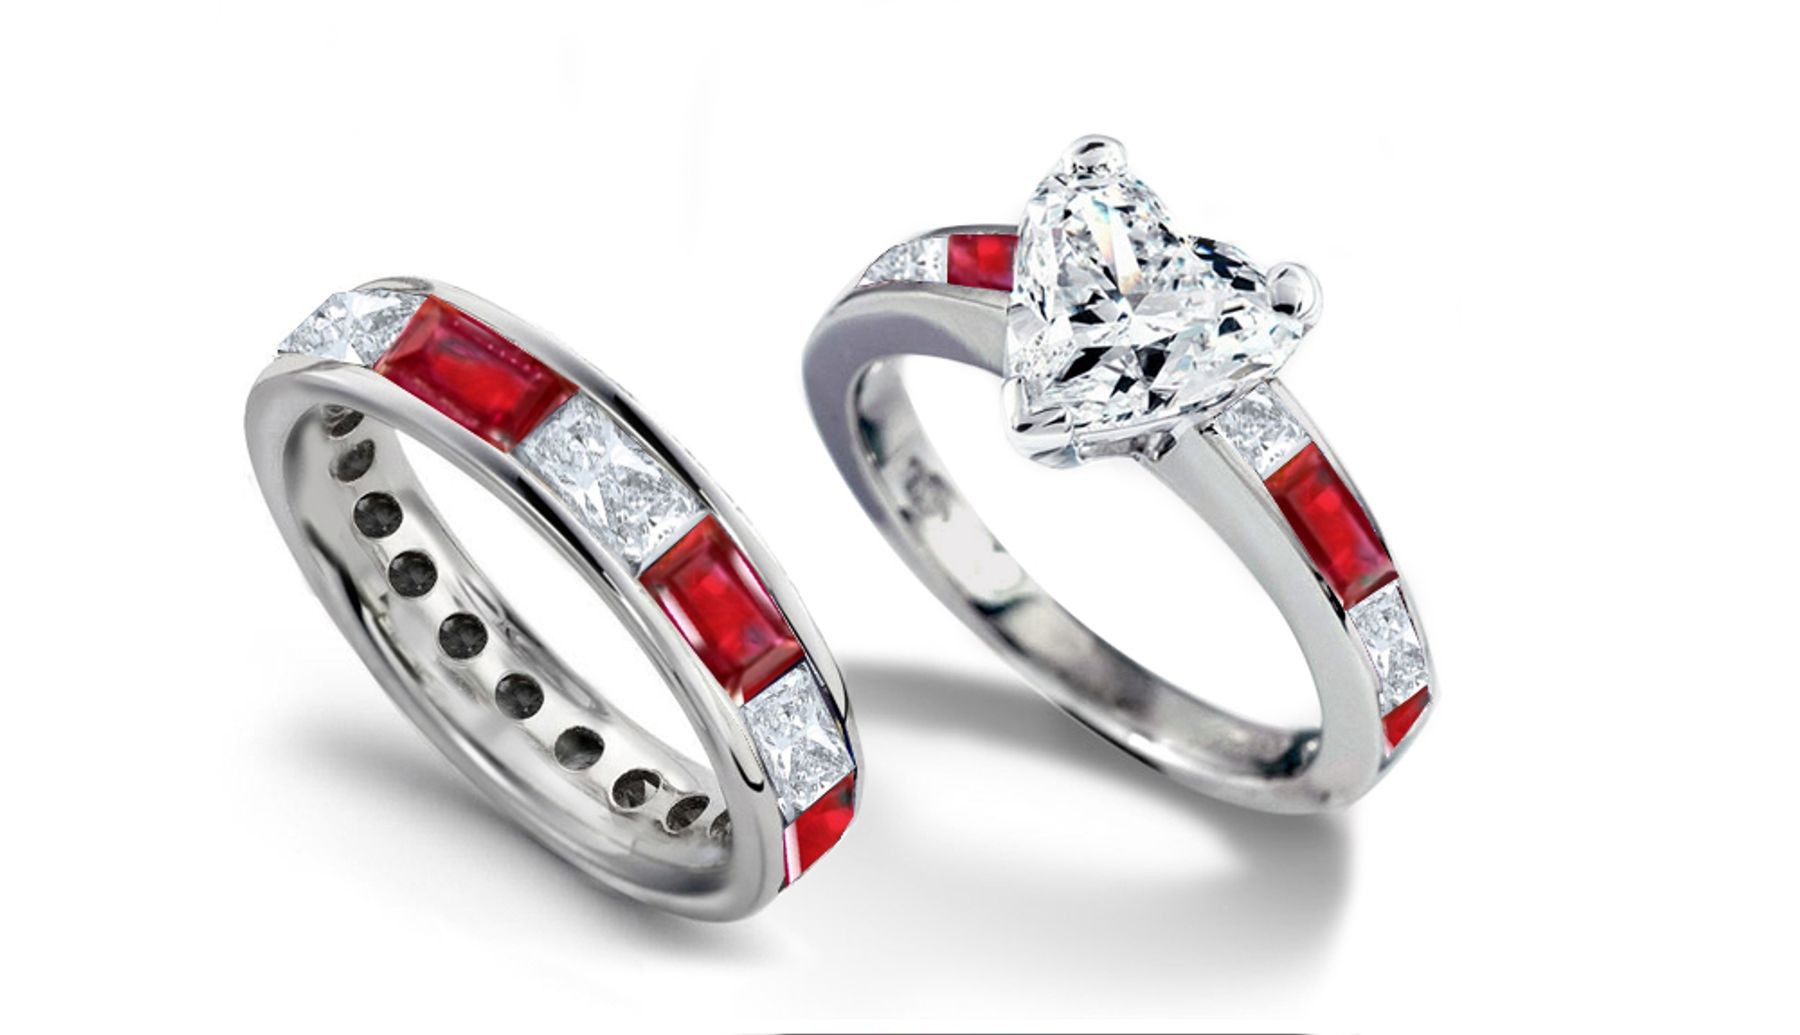 Heart Diamond & Baguette Diamond & Ruby Engagement Ring & Wedding Band in Platinum & Gold Size 3 to 8